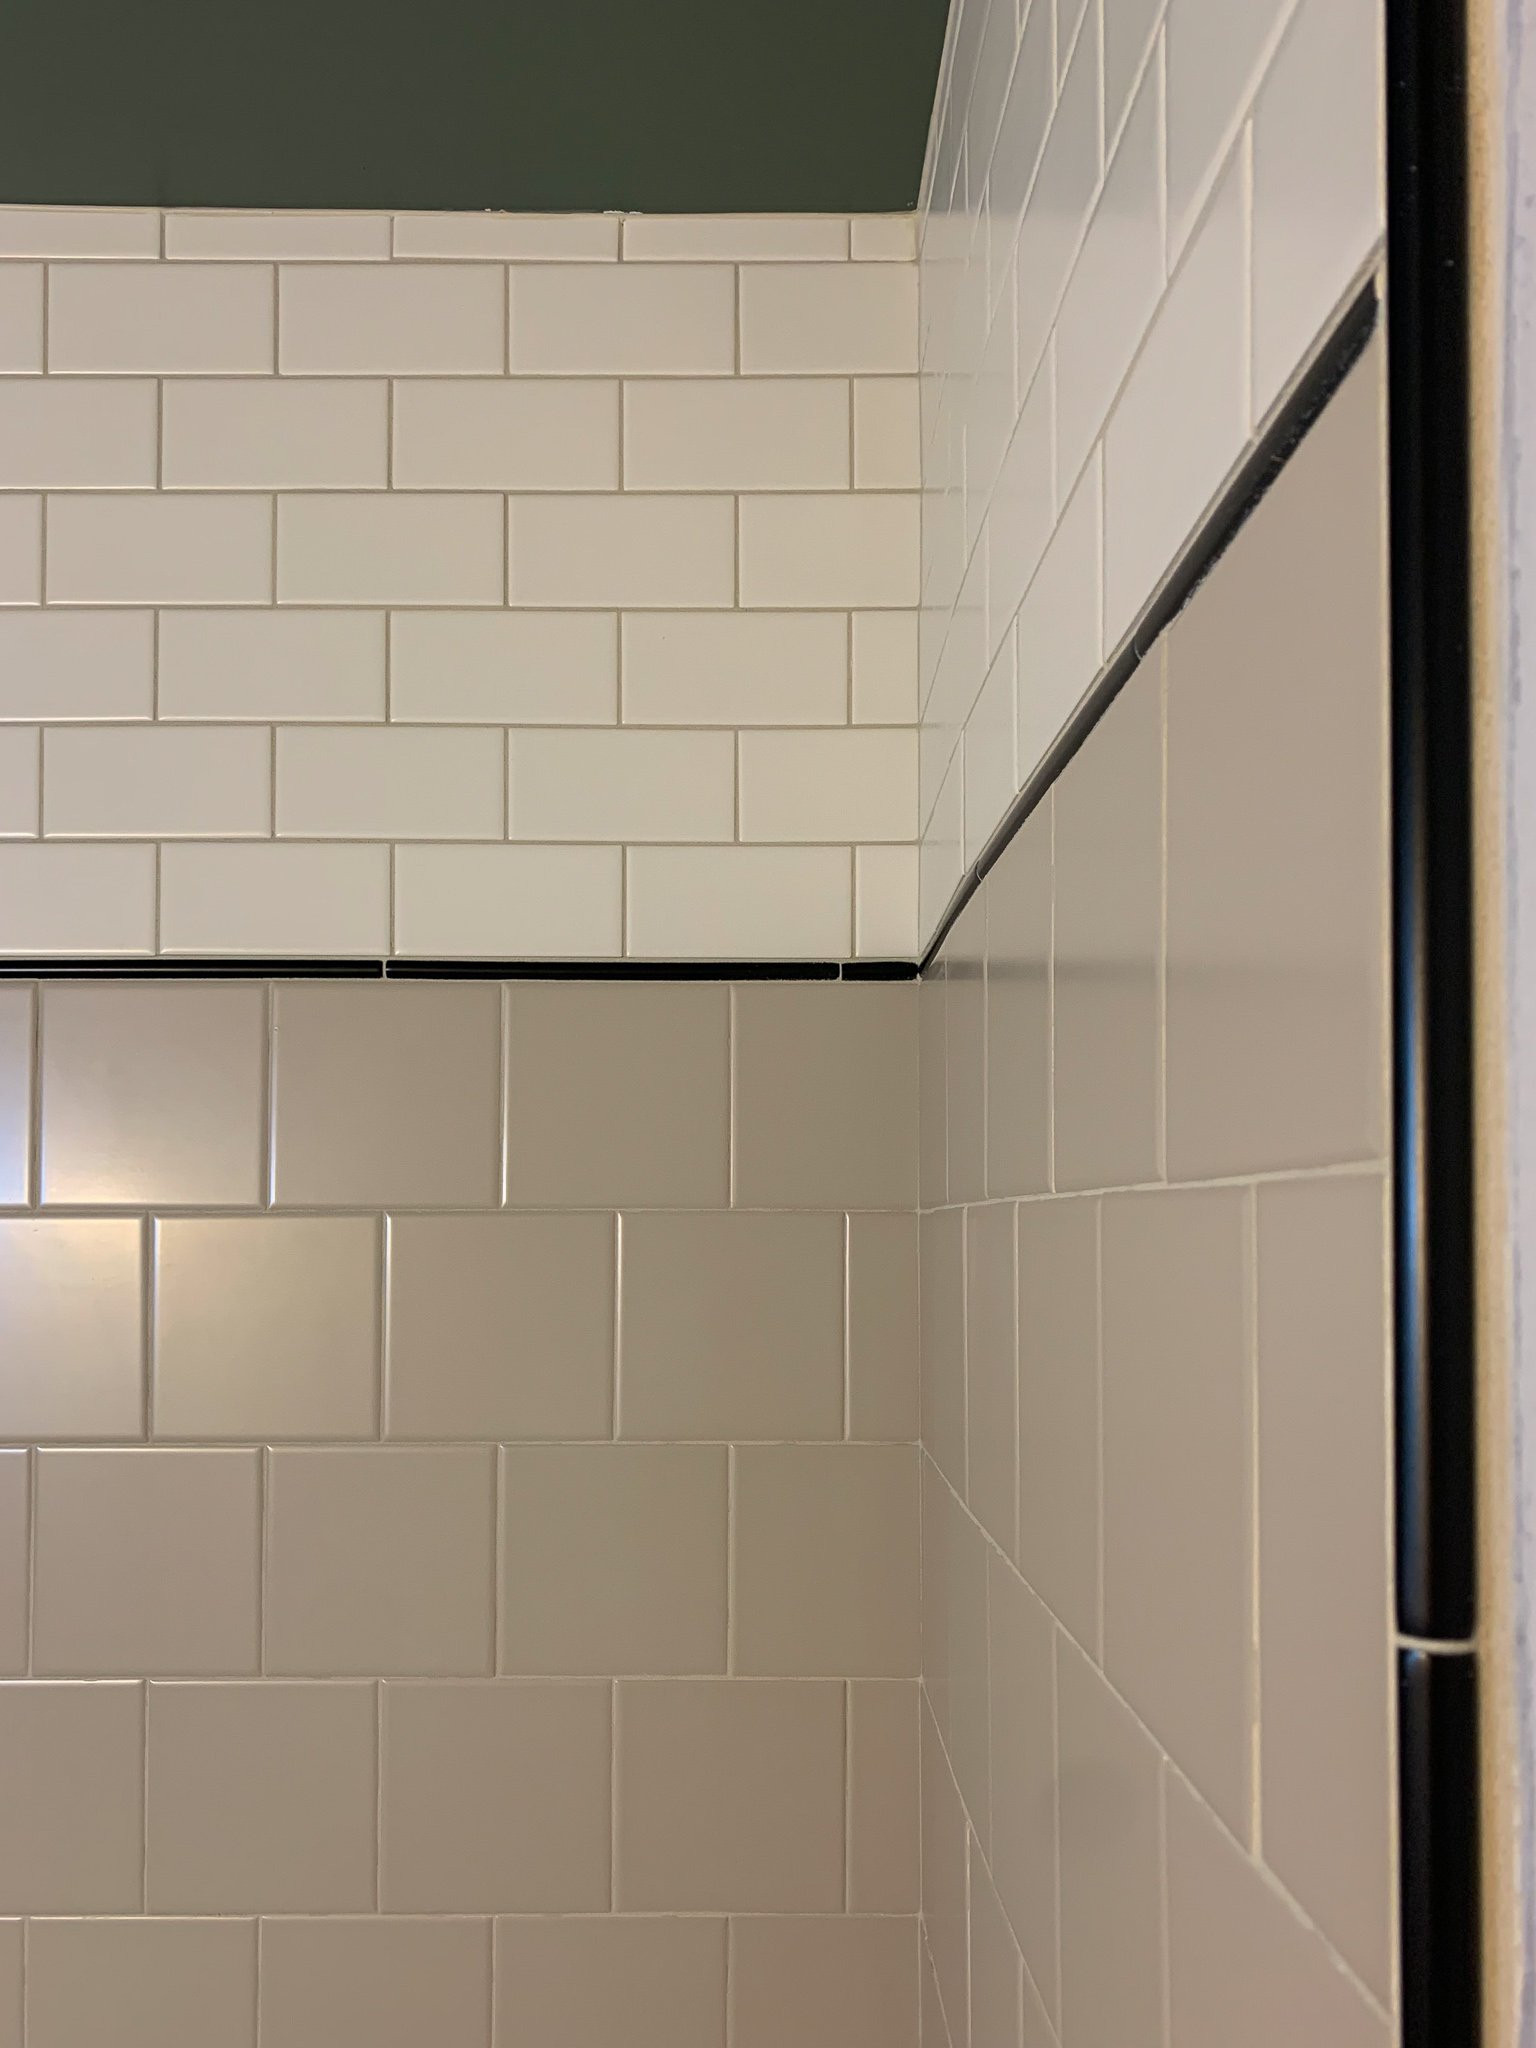 subway tile shower with tile patter of white, beige and black wtih a pencil tile edge trim